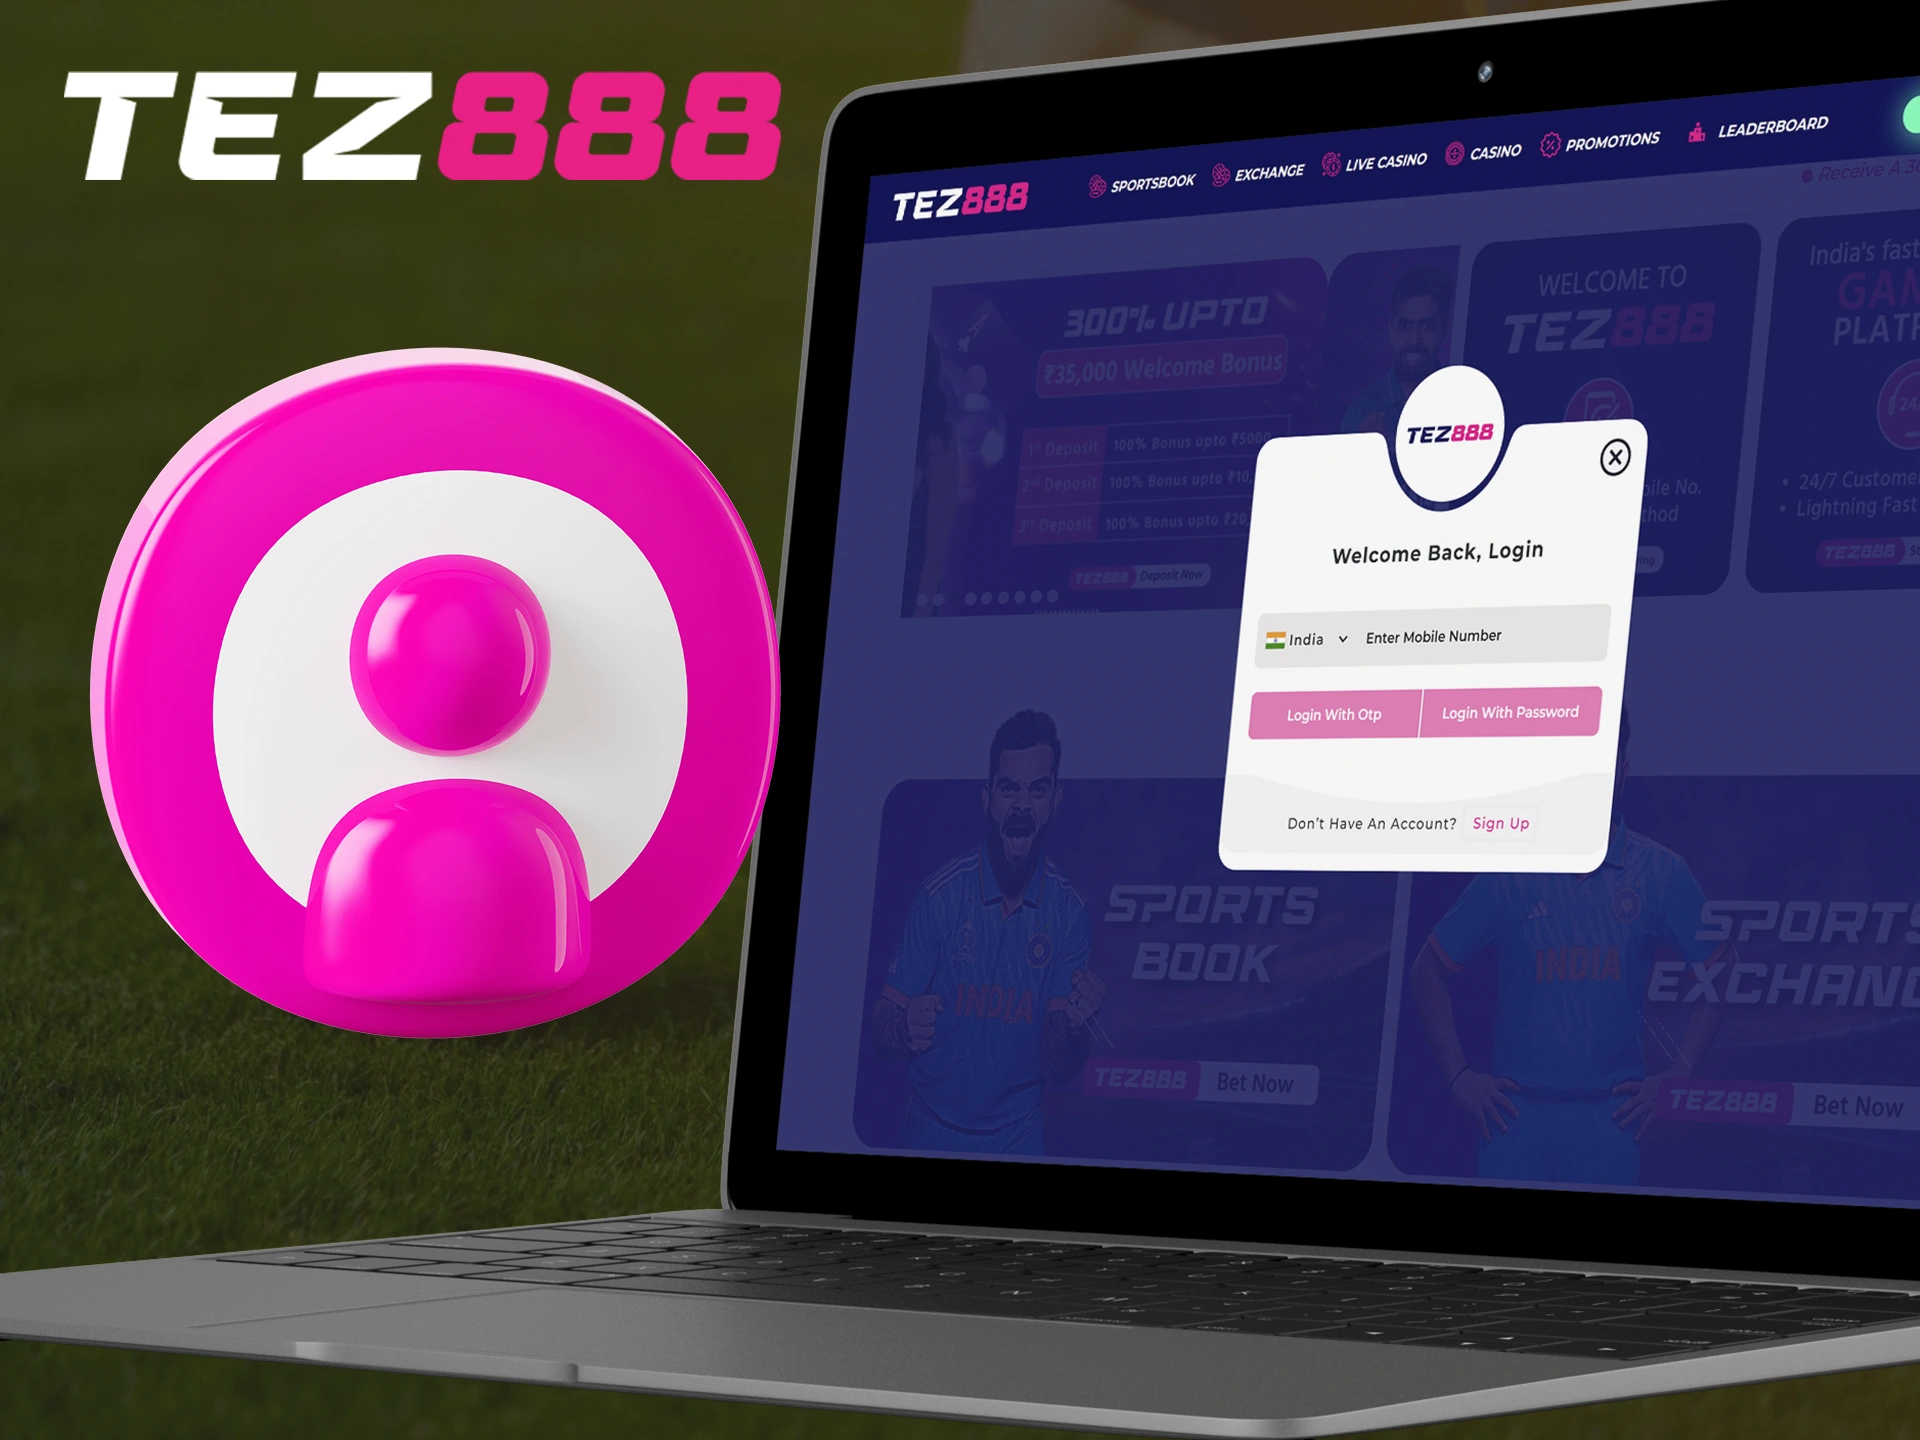 Log in to your profile on the Tez888 website.